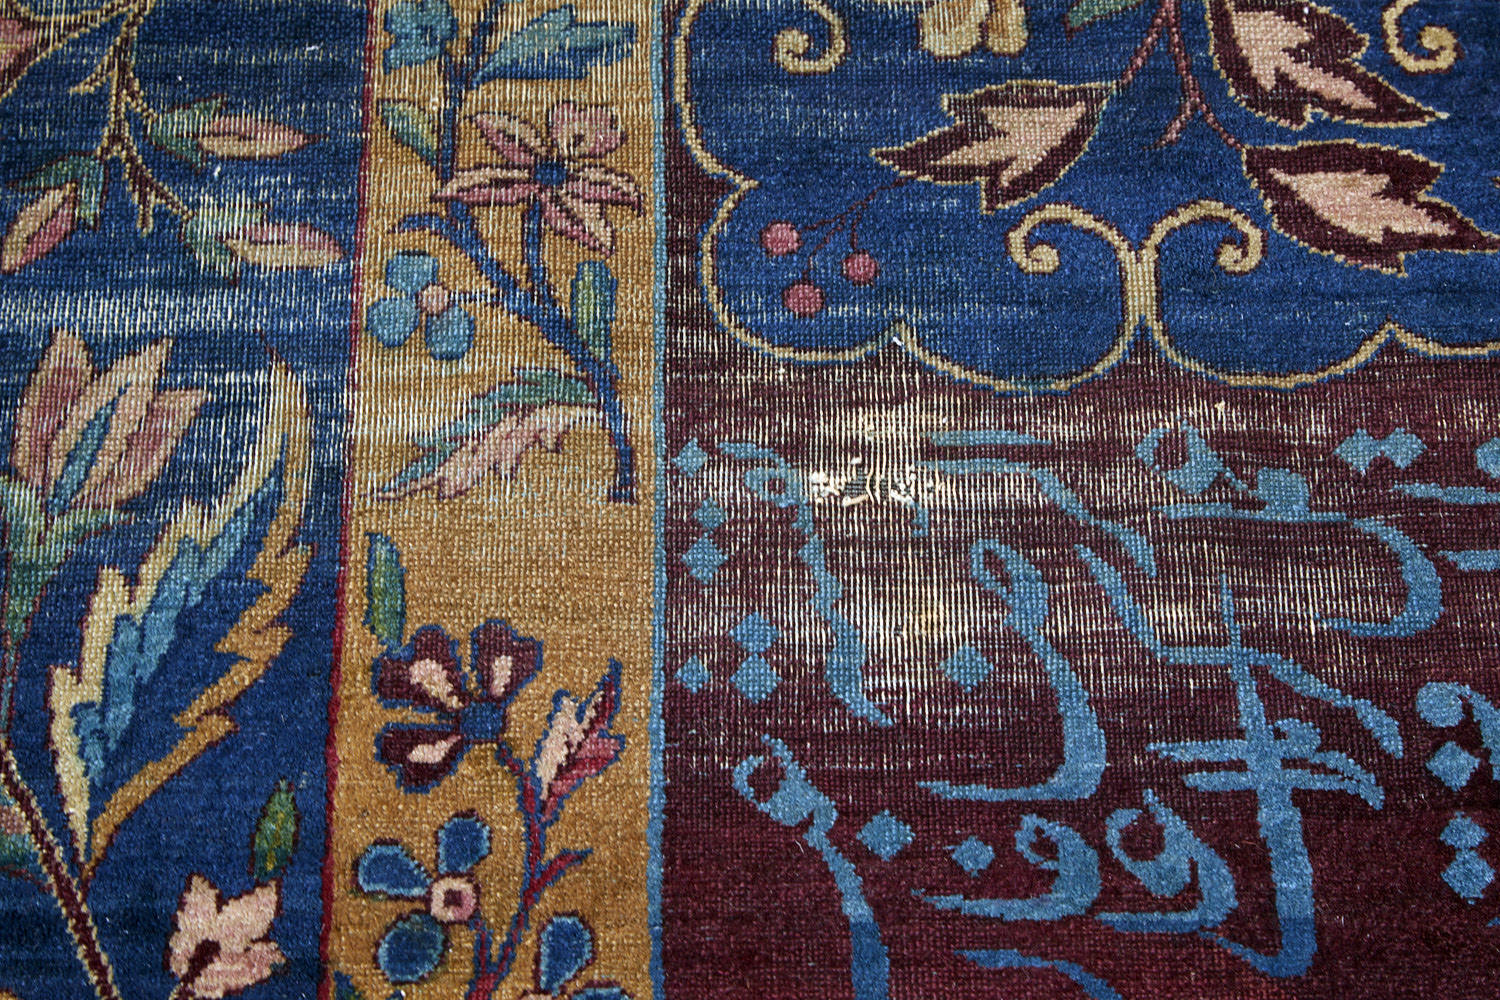 Blue Persian rug with gold and burgandy floral patterns and Arabic writing in the border, handwoven antique area rug - Available from King Kennedy Rugs Los Angeles